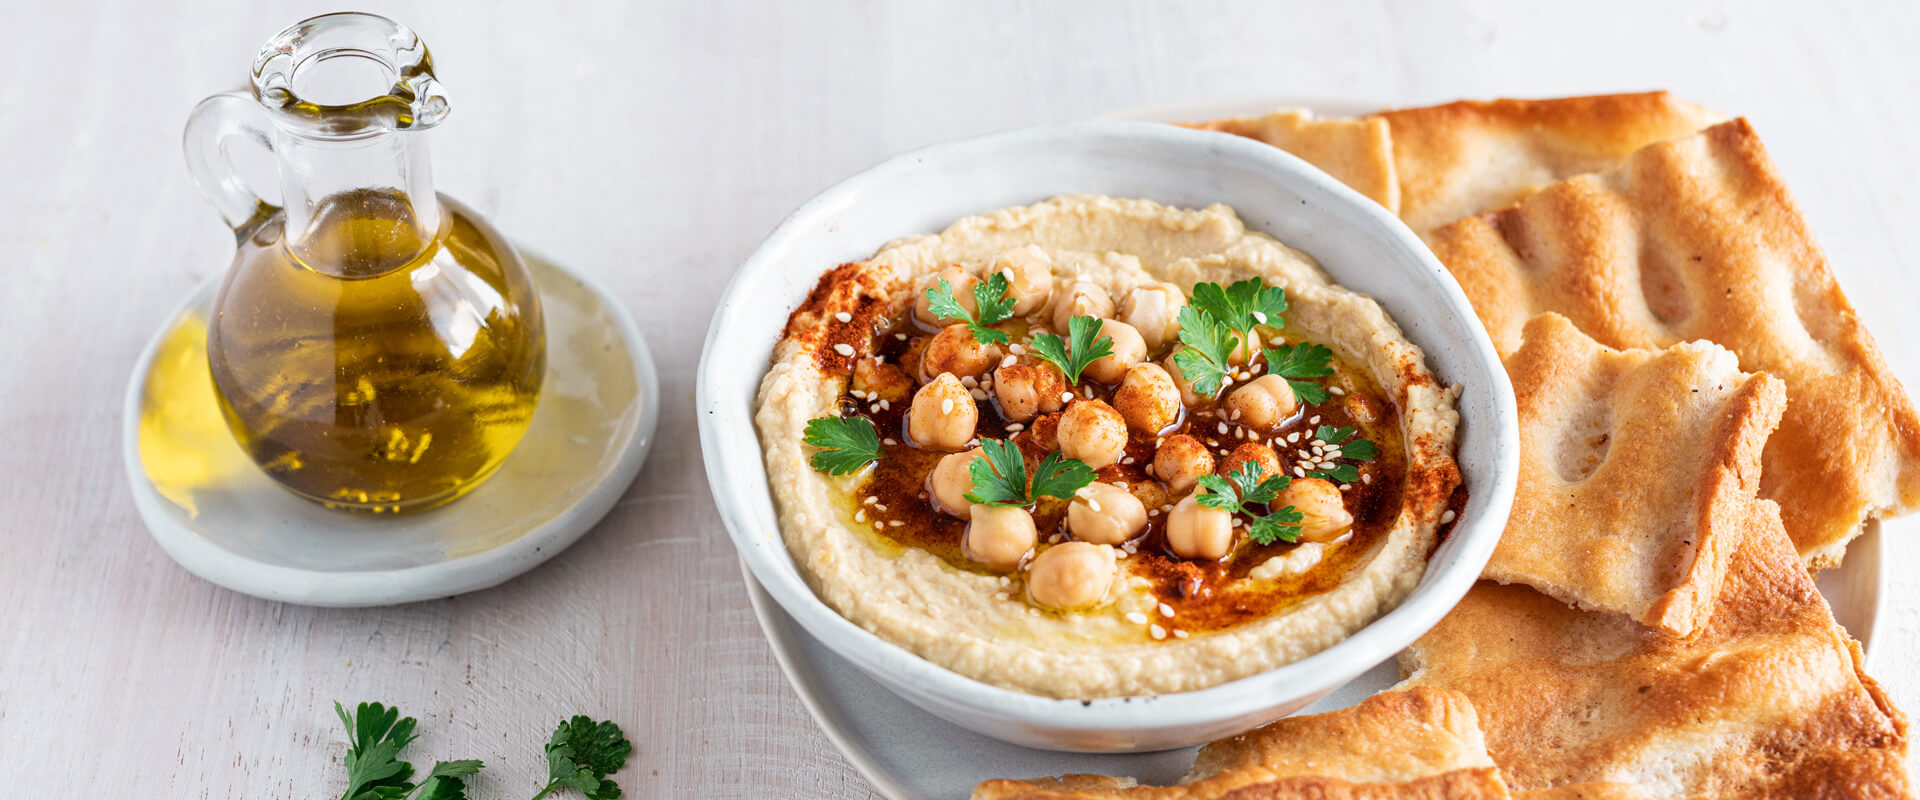 chickpea and Carli extravirgin olive oil hummus